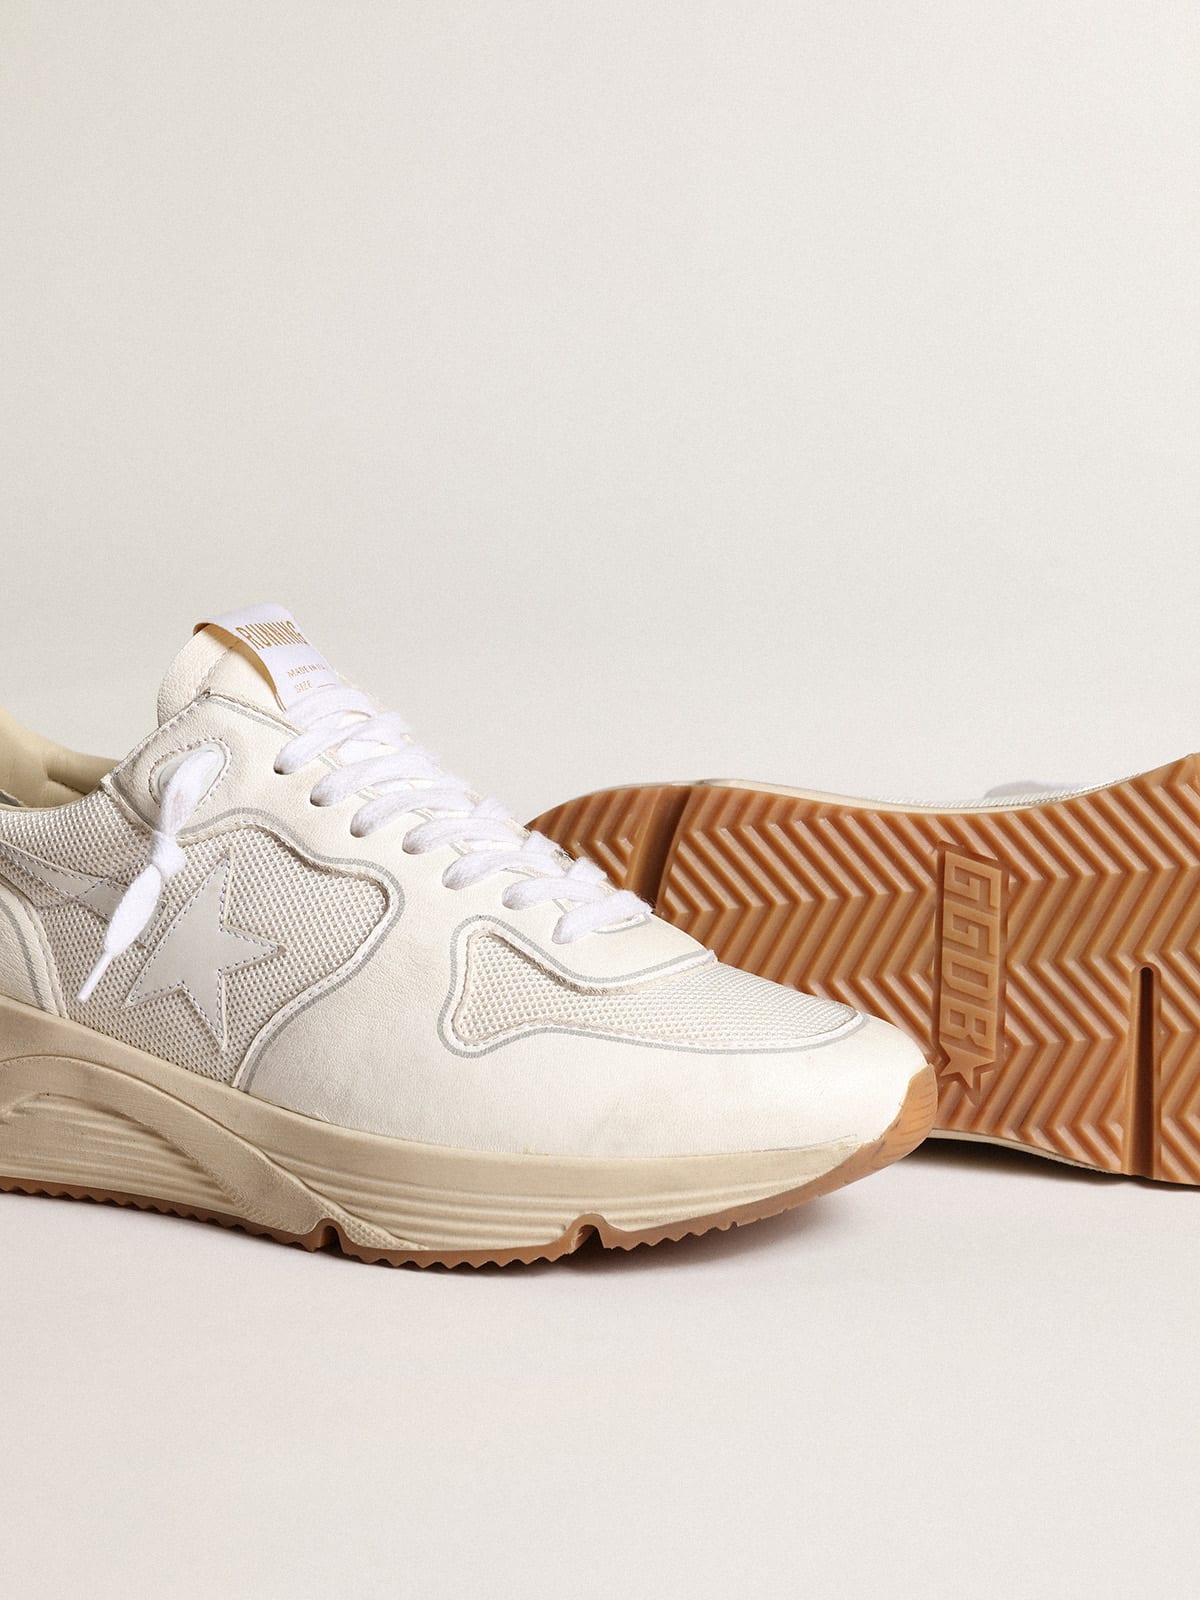 Golden Goose - Women's Running Sole in mesh and white nappa in 